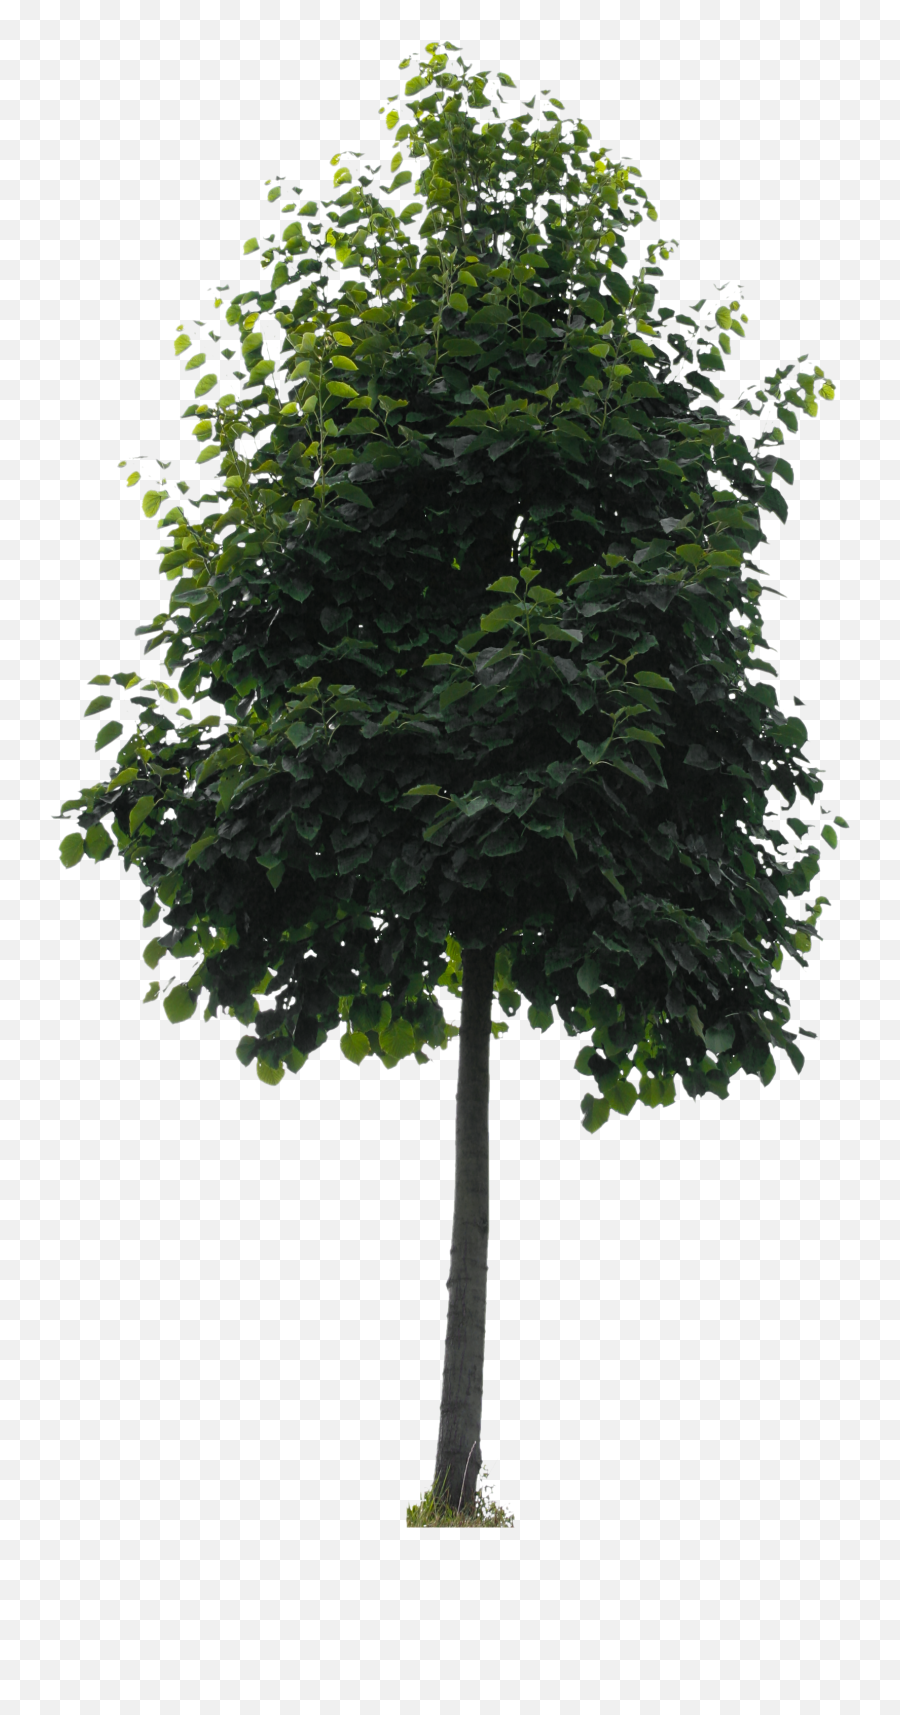 Small City Tree Free Cut Out People Trees And Leaves Png Transparent